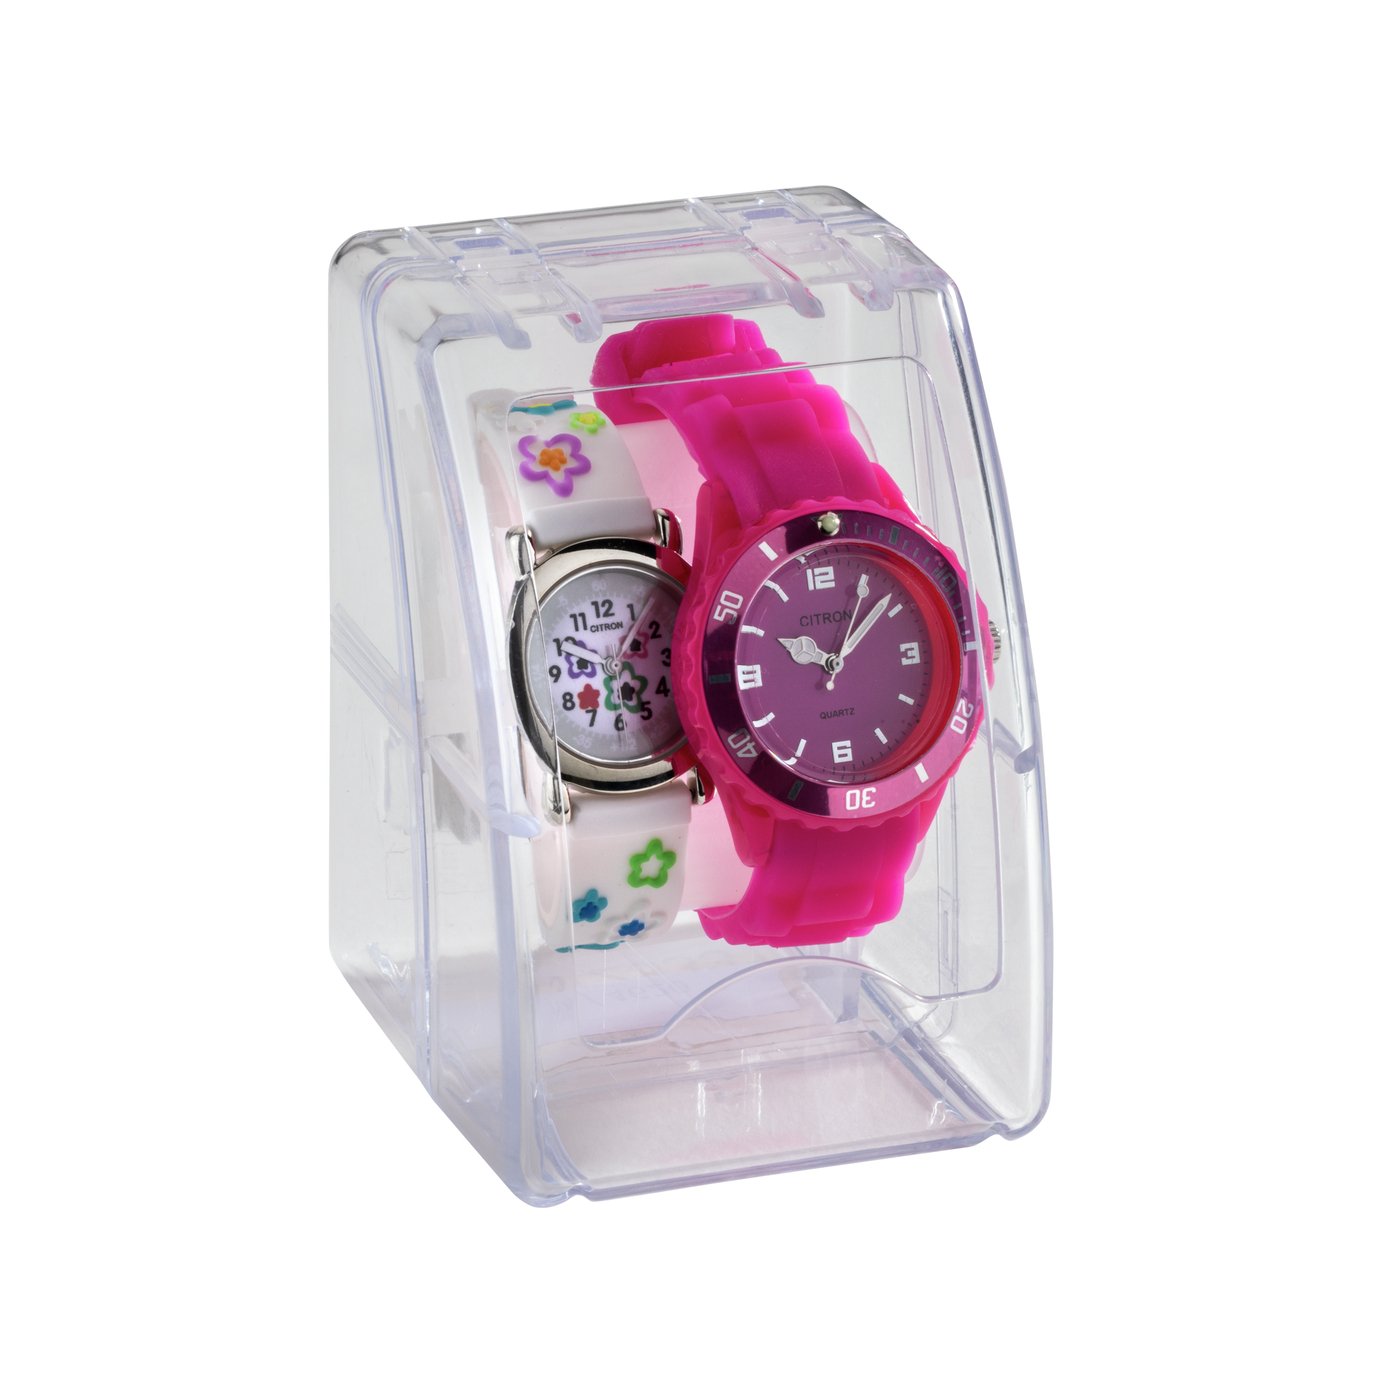 Citron Silicon Character Strap Children's Watches - Set of 2